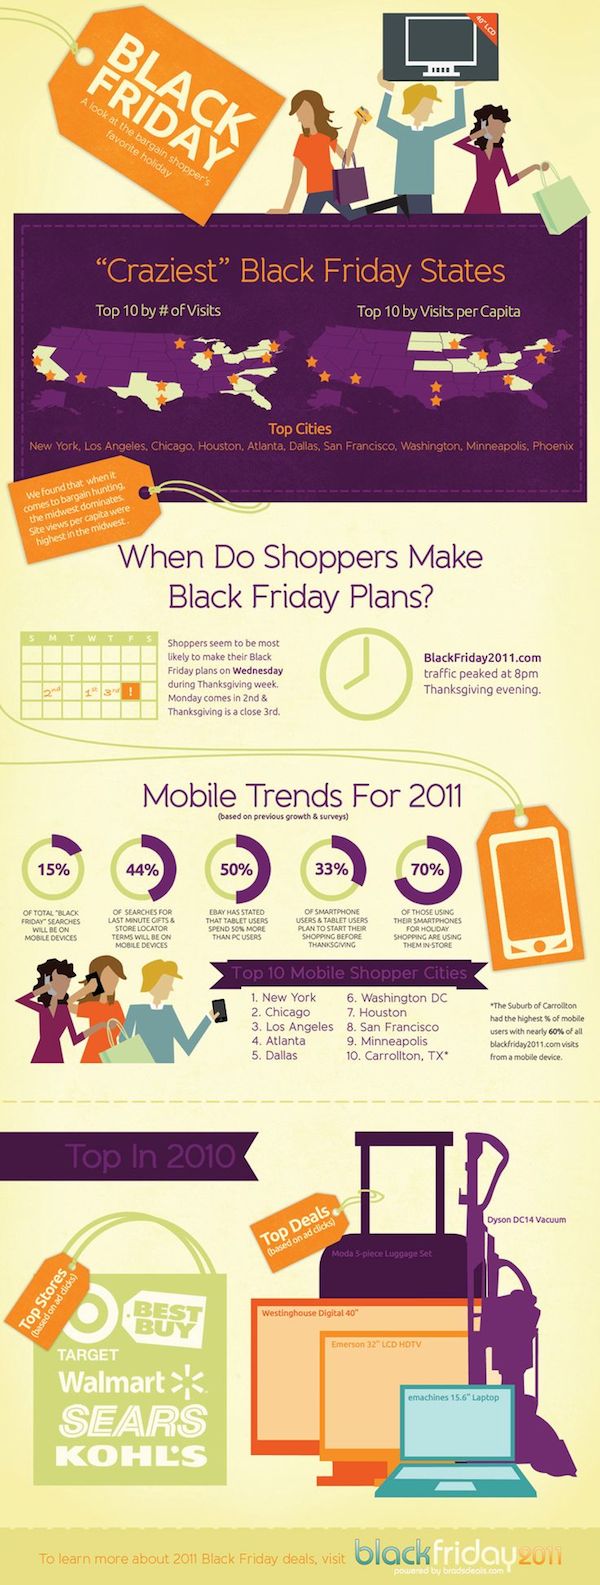 20 Black Friday And Cyber Monday Infographics image 51.jpg